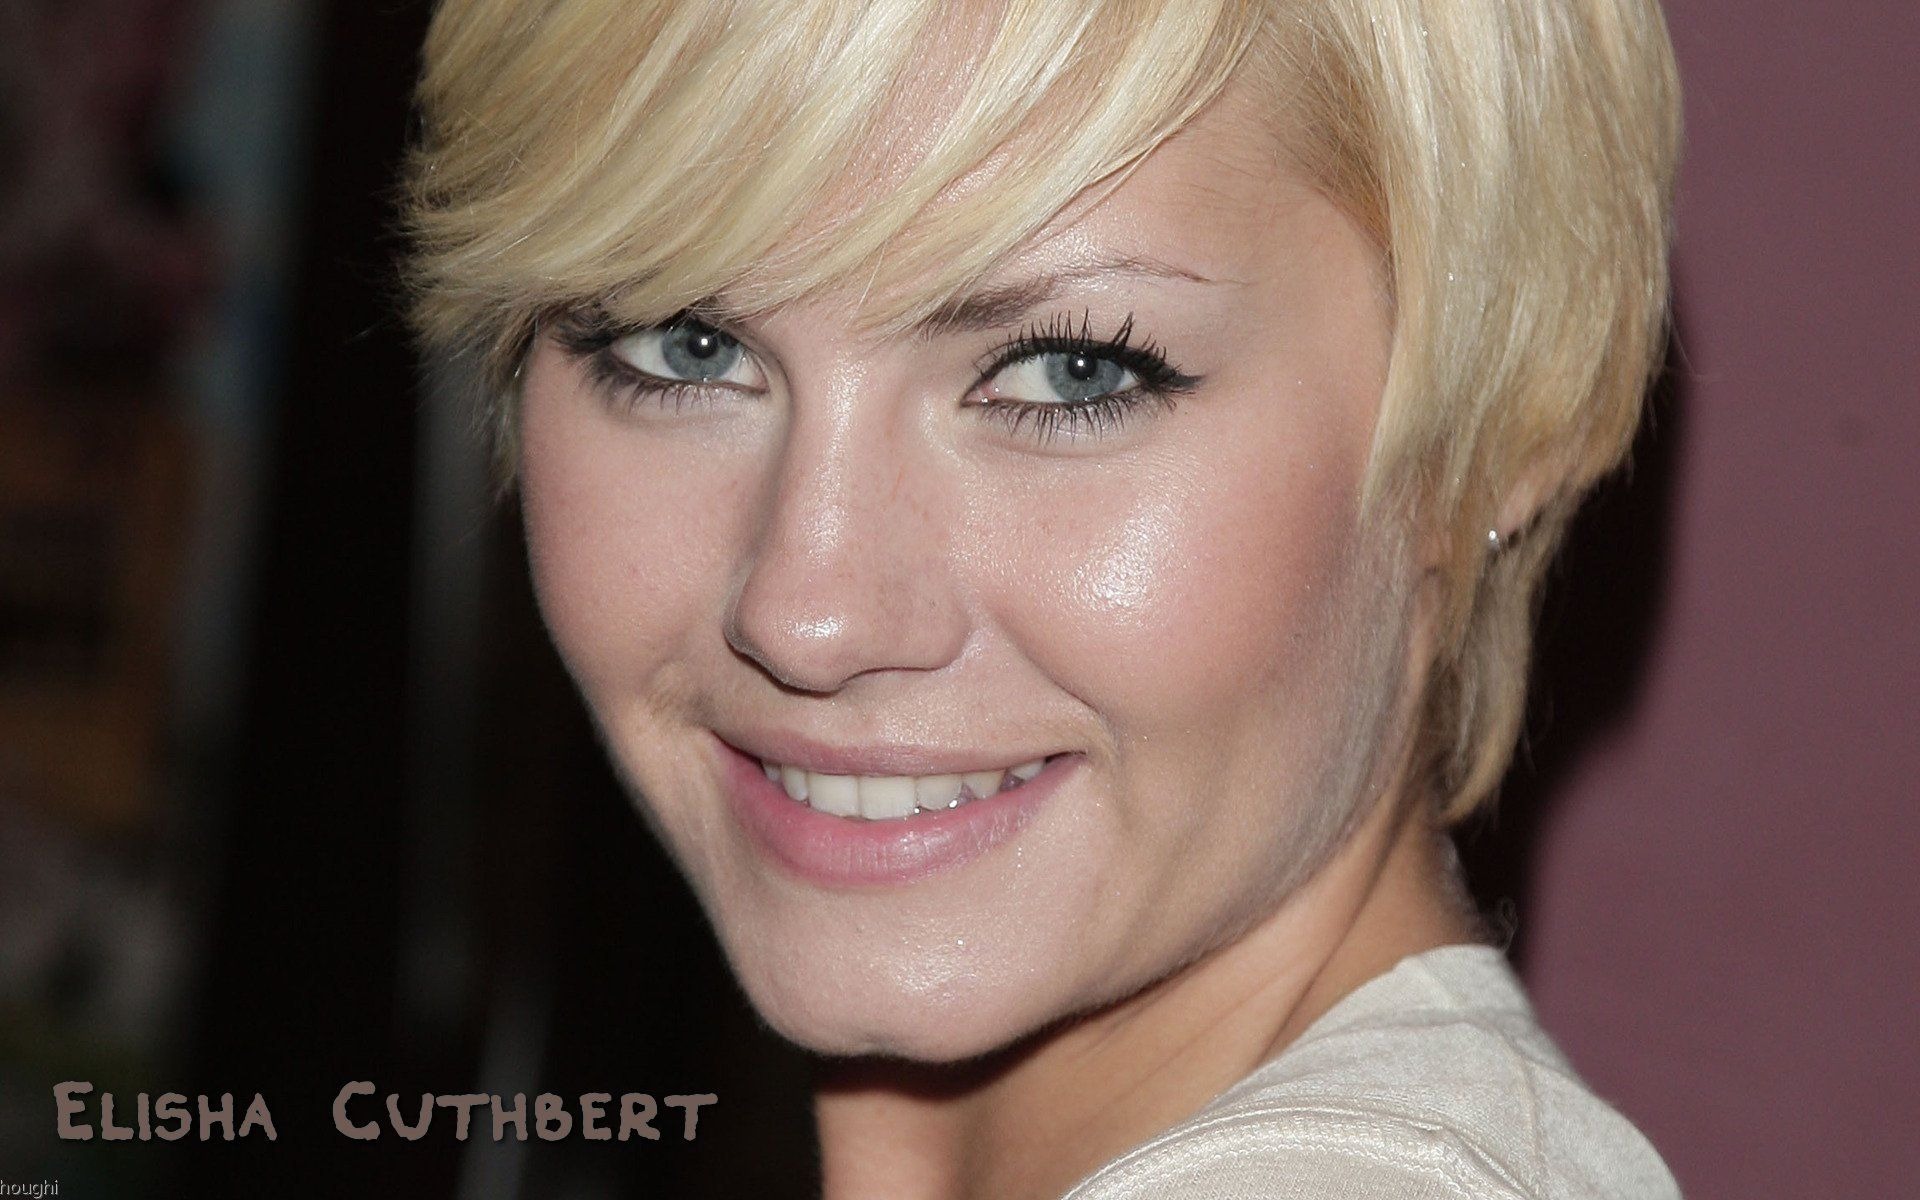 Elisha Cuthbert #023 - 1920x1200 Wallpapers Pictures Photos Images